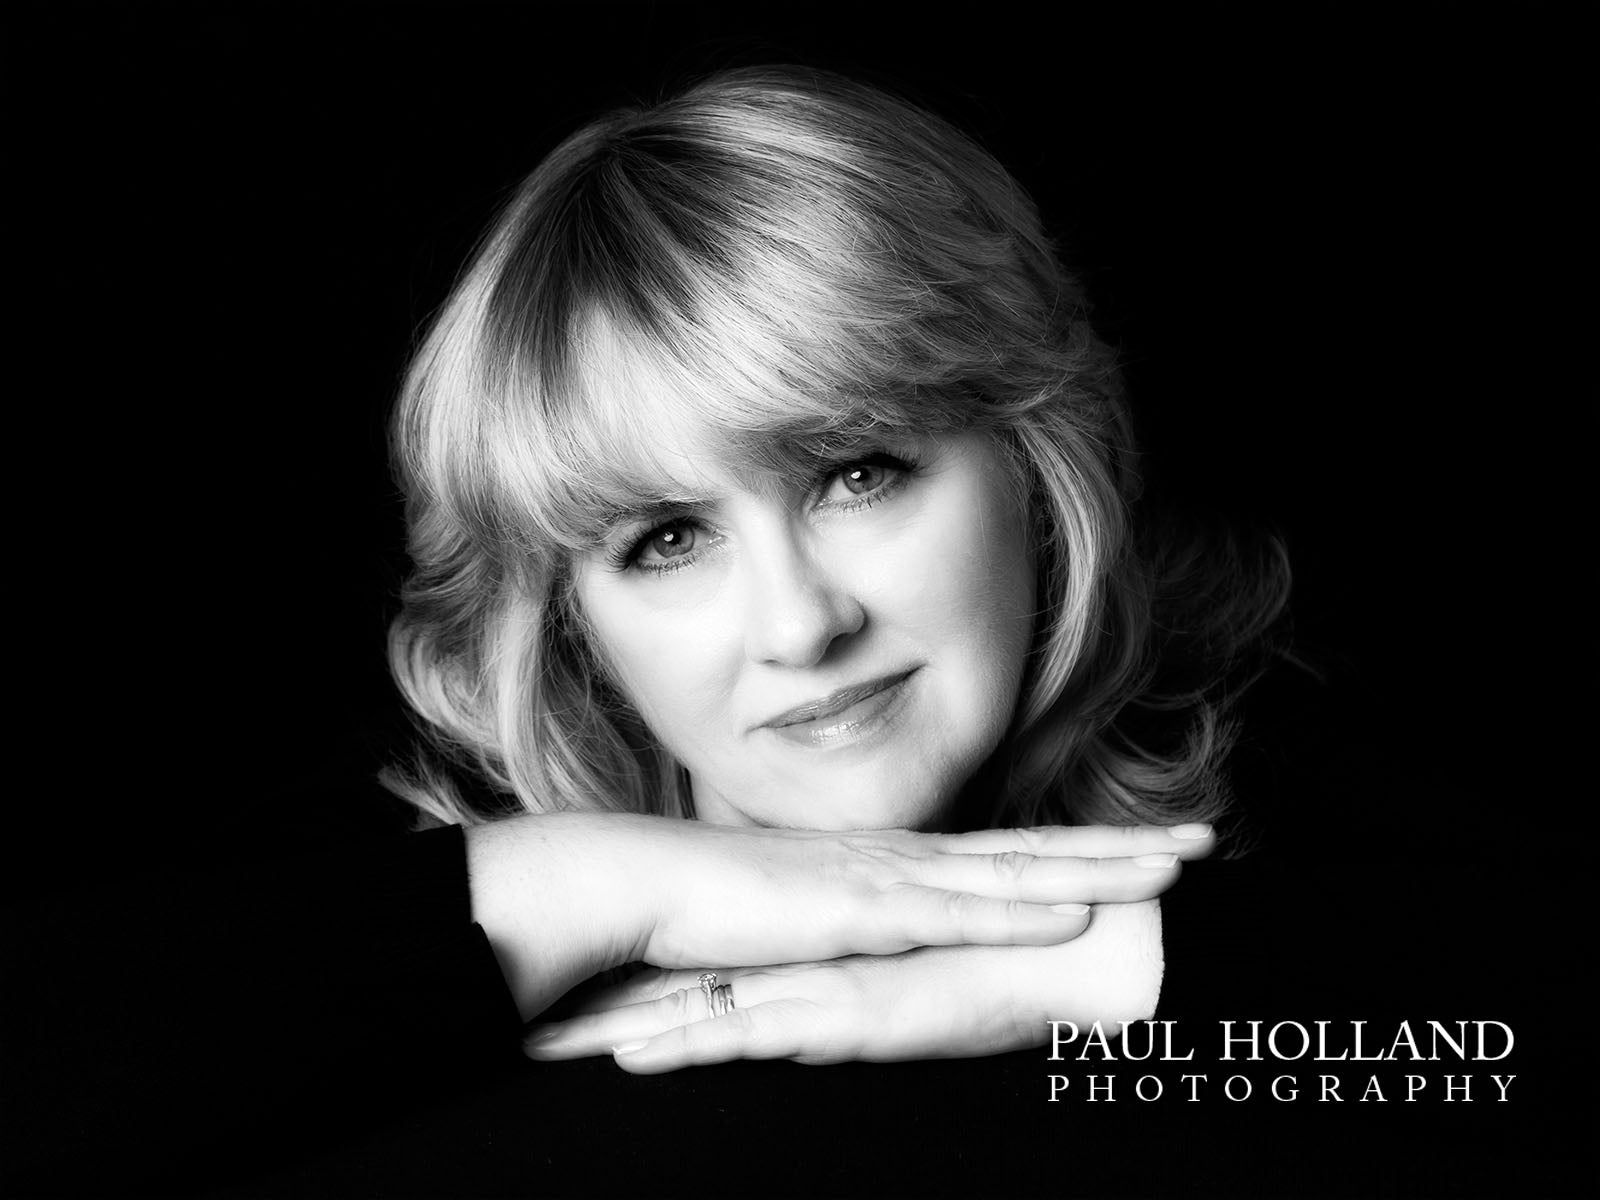 Black and White Photo Shoot in the Studio - 1 person